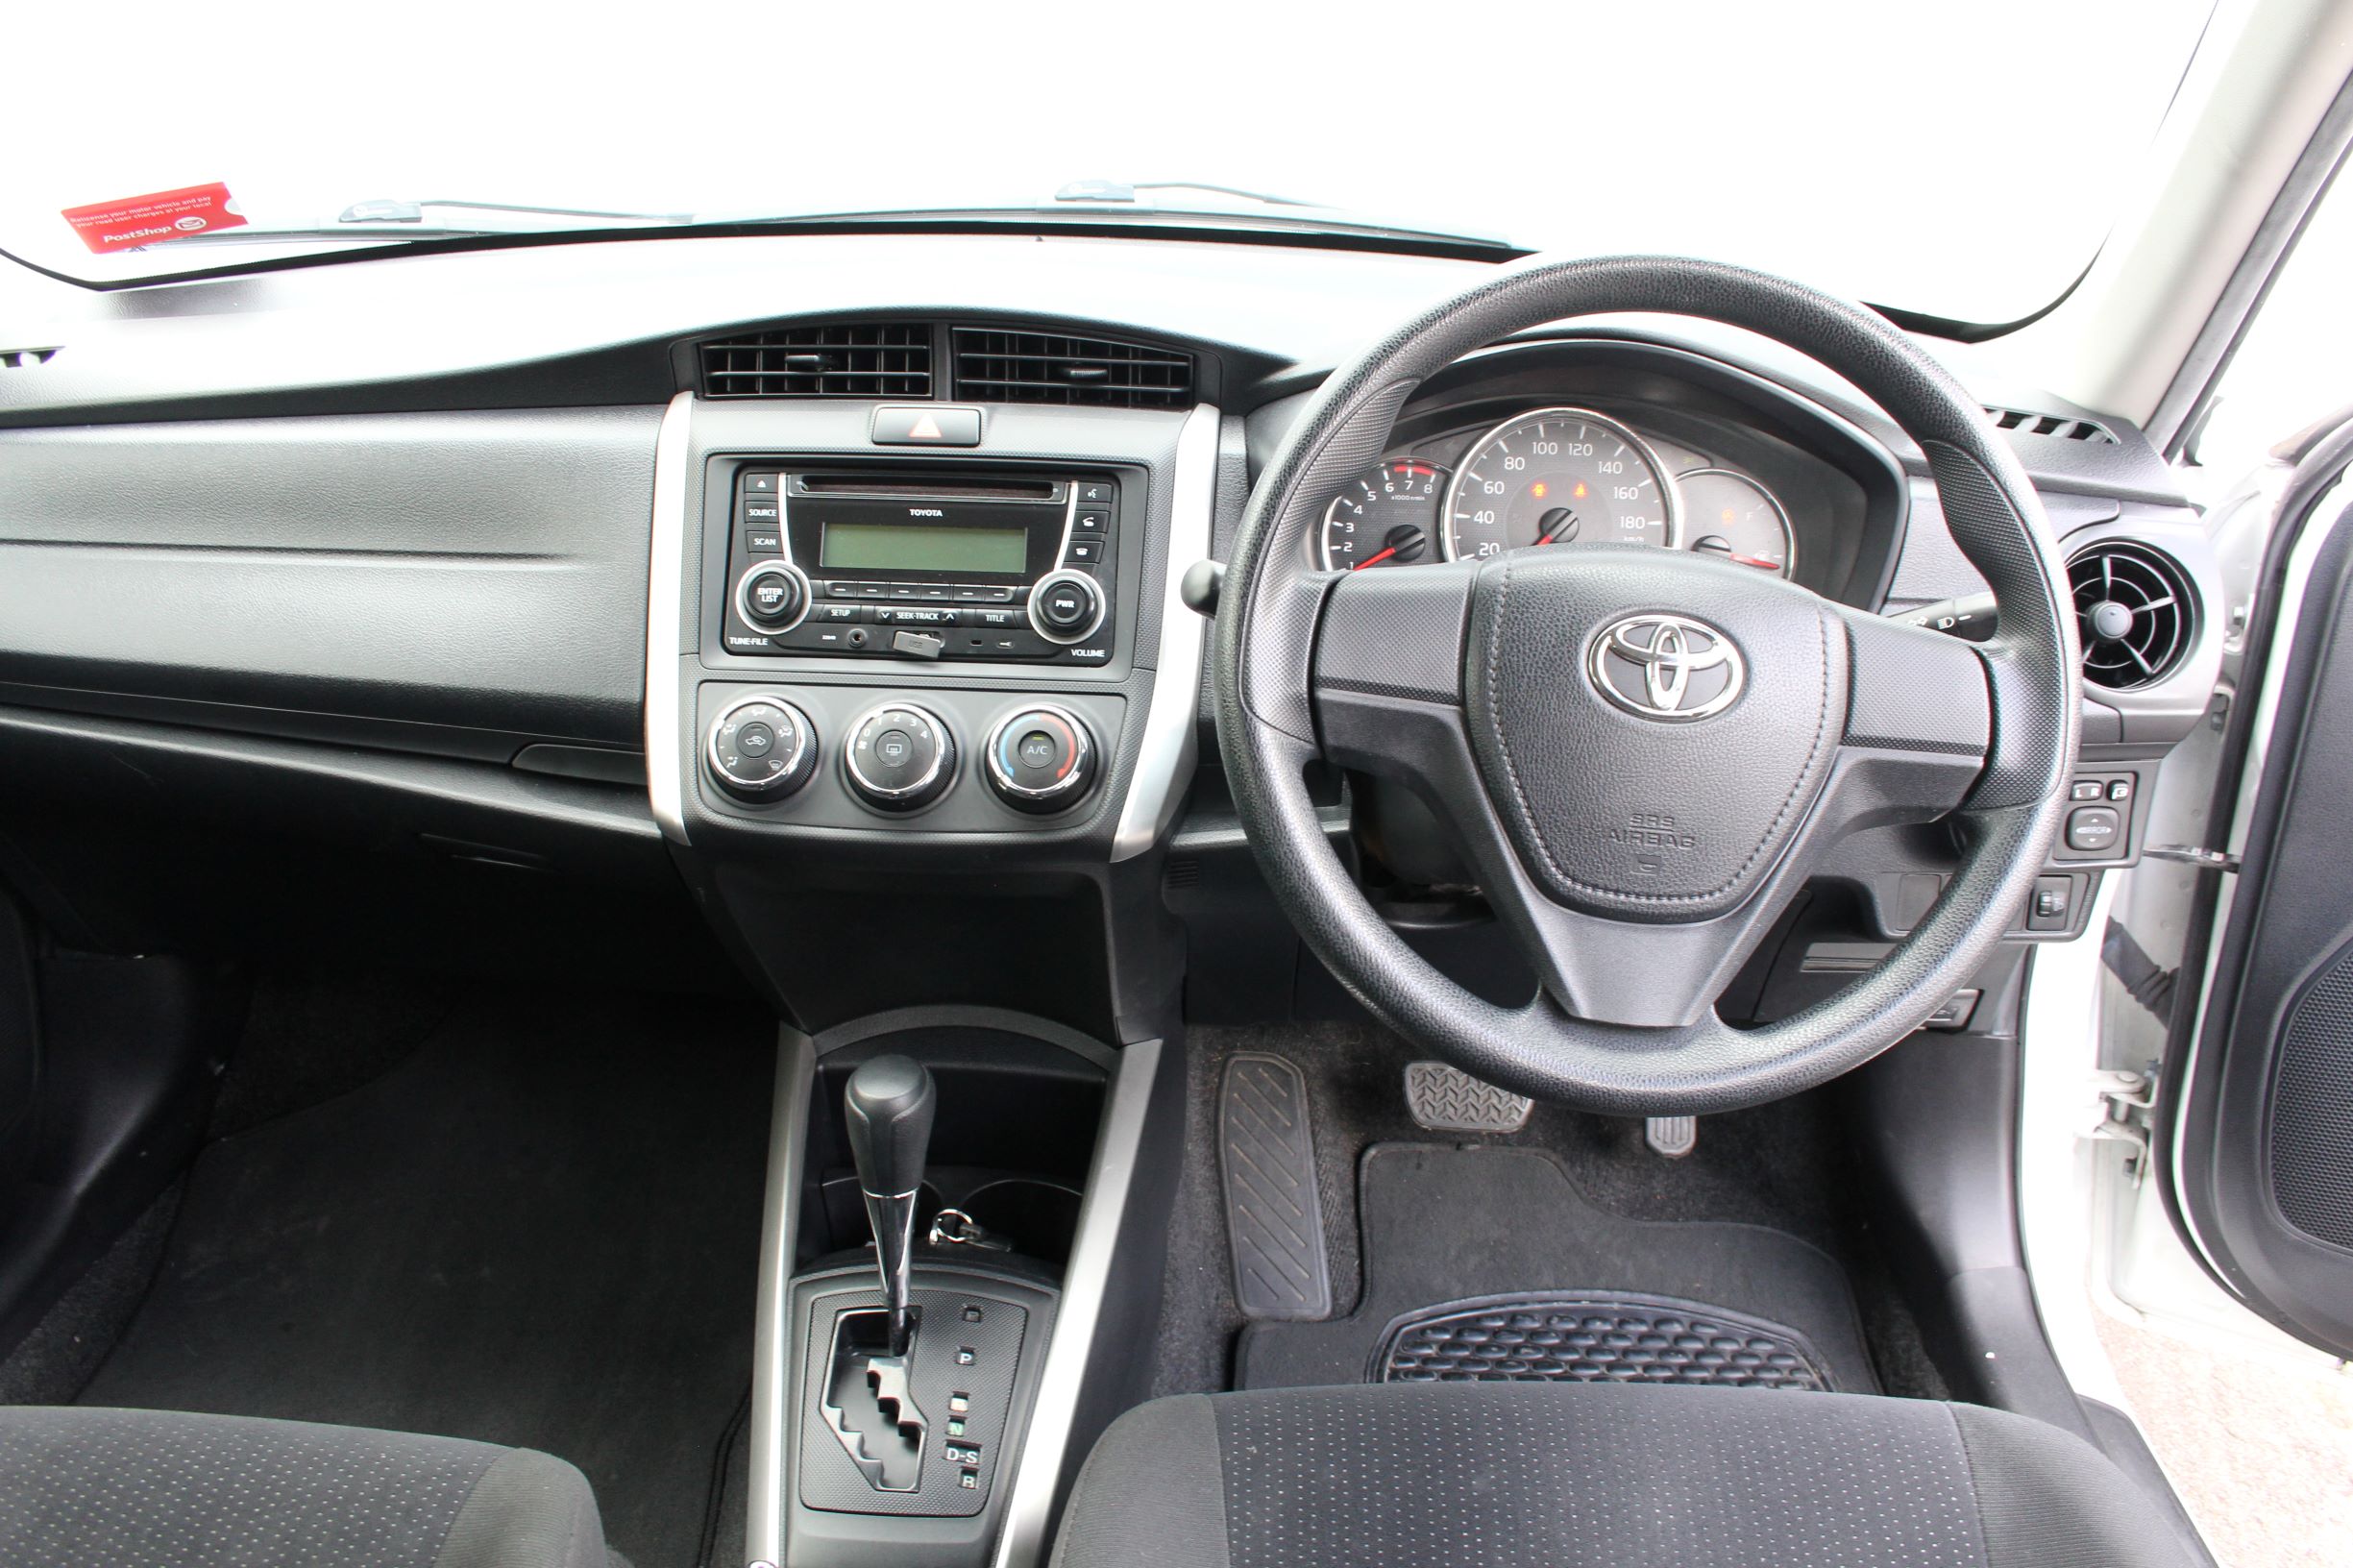 Toyota Corolla wagon 2017 for sale in Auckland